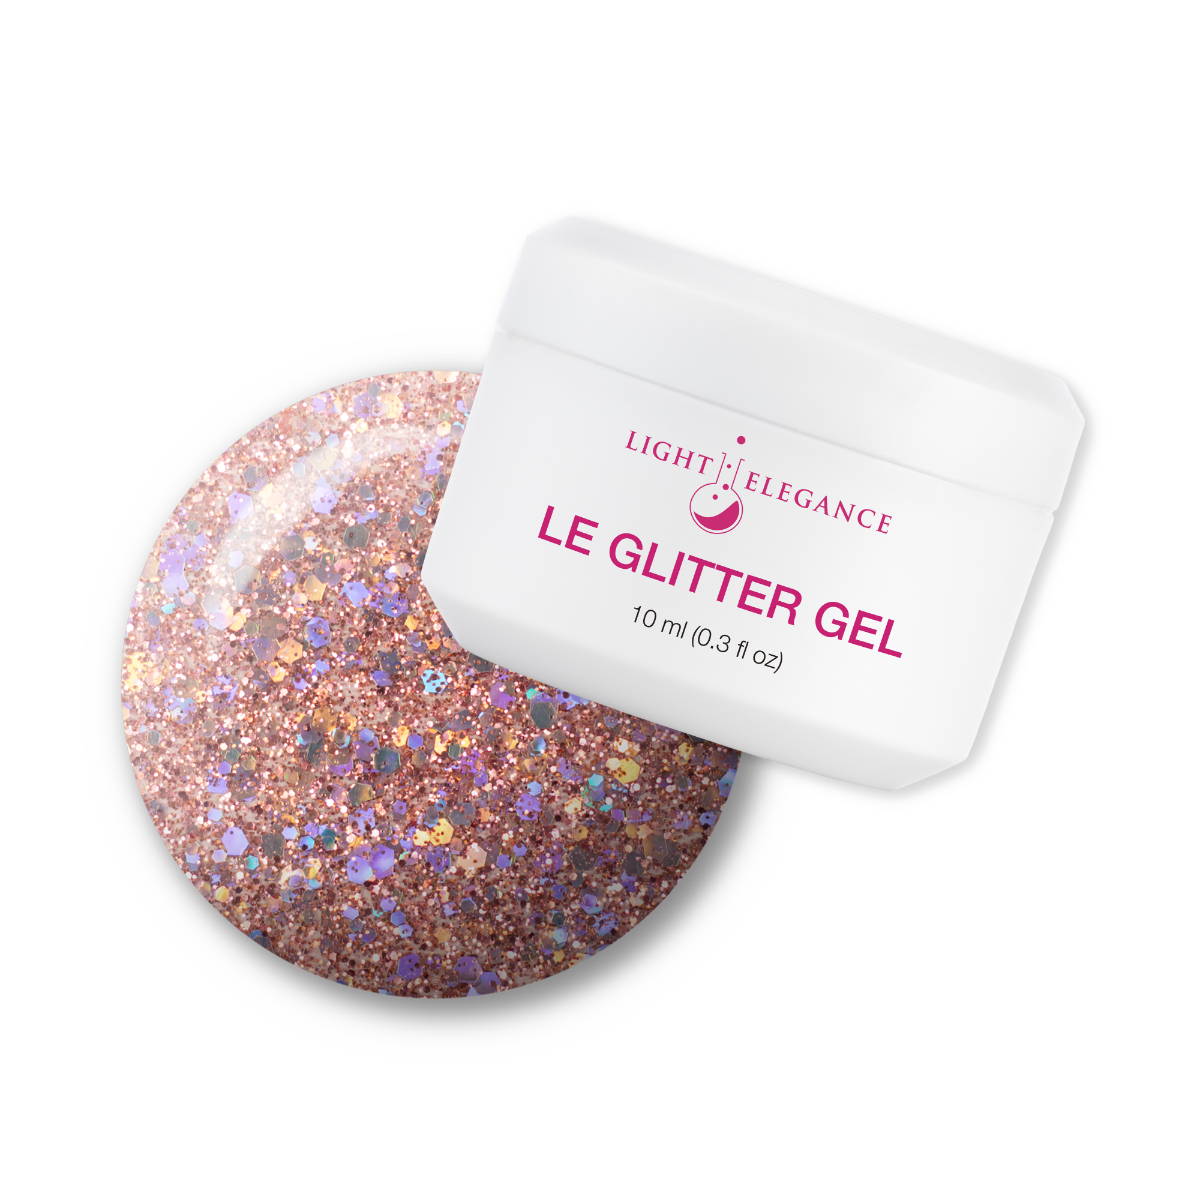 Light Elegance Glitter Gel - You Bring the Wine :: New Packaging - Creata Beauty - Professional Beauty Products